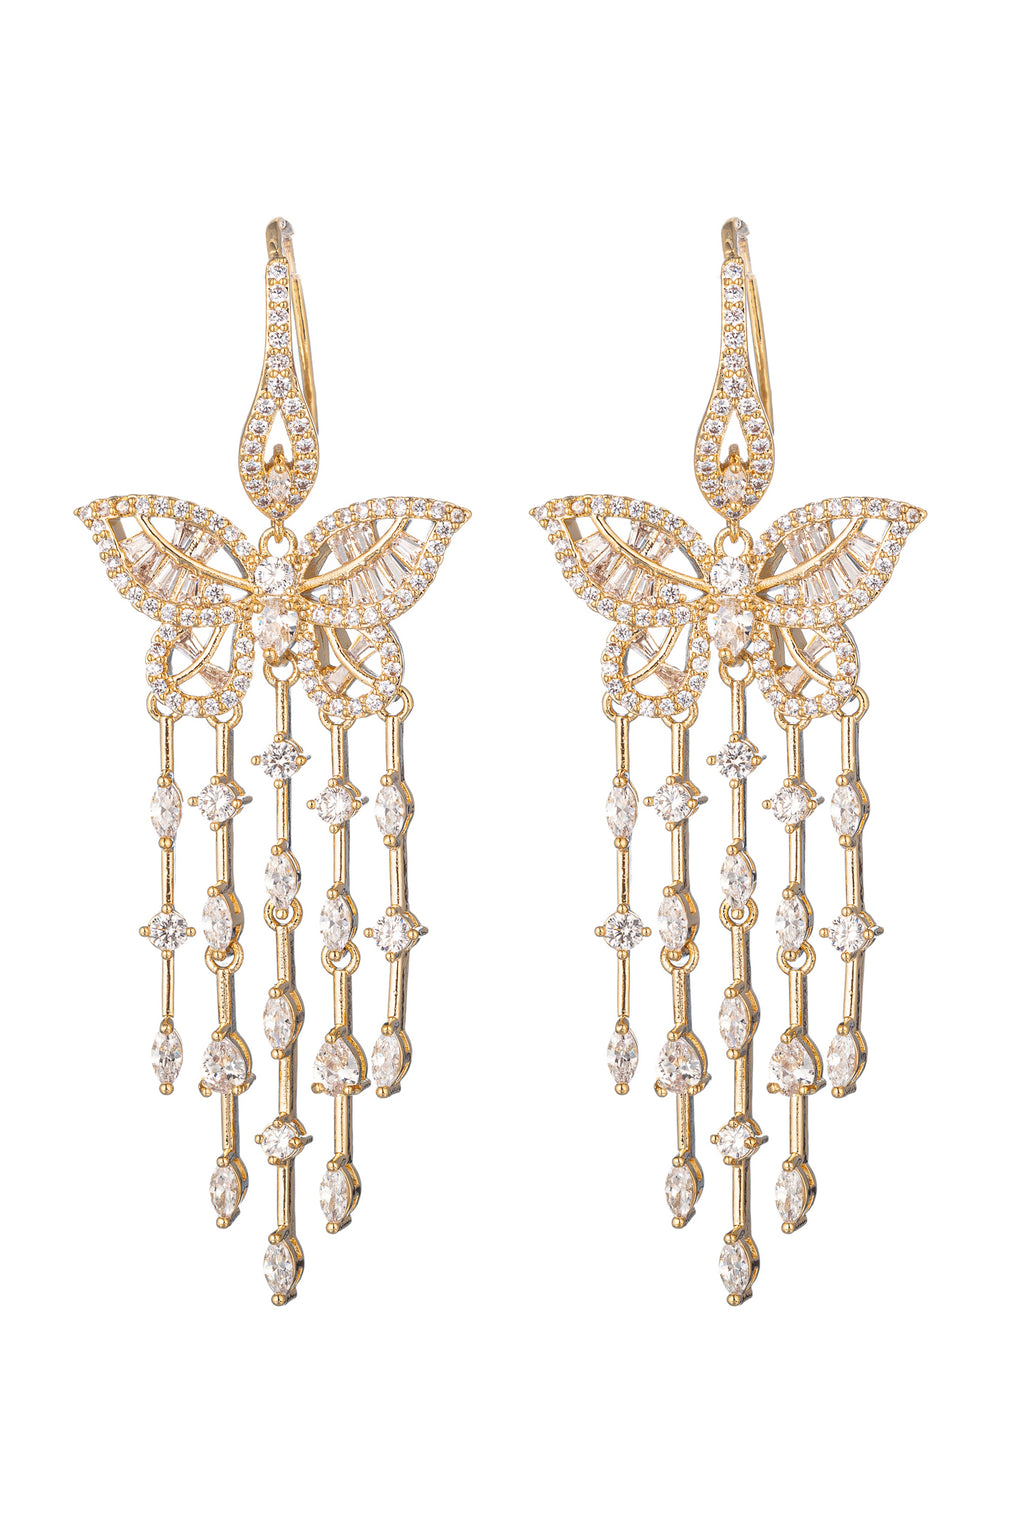 Gold tone brass butterfly earrings studded with CZ crystals.